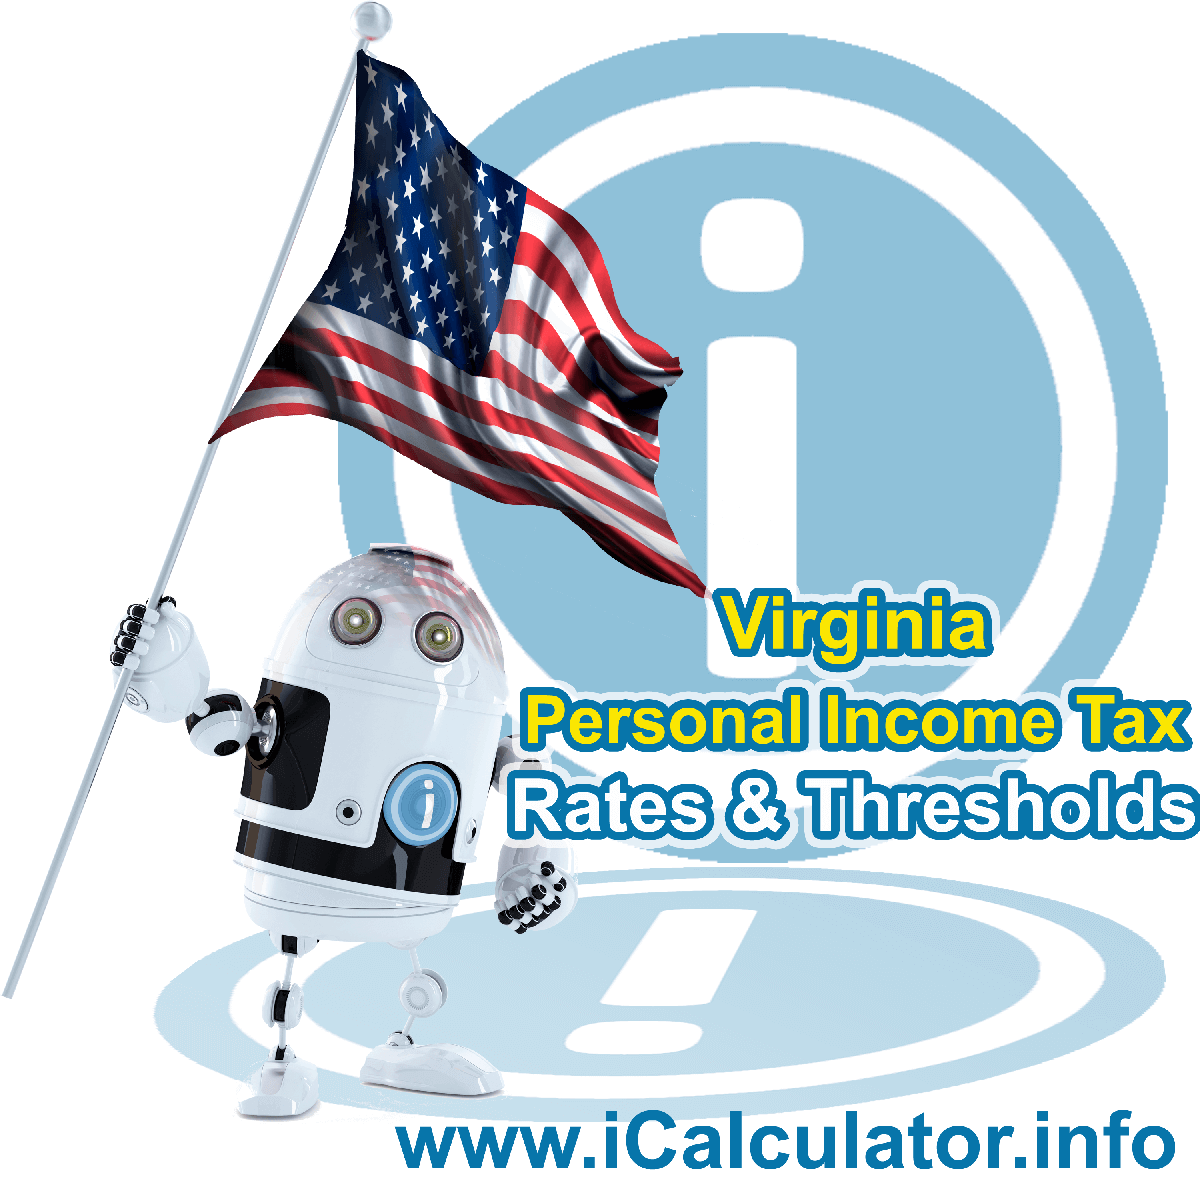 Virginia State Tax Tables 2021. This image displays details of the Virginia State Tax Tables for the 2021 tax return year which is provided in support of the 2021 US Tax Calculator